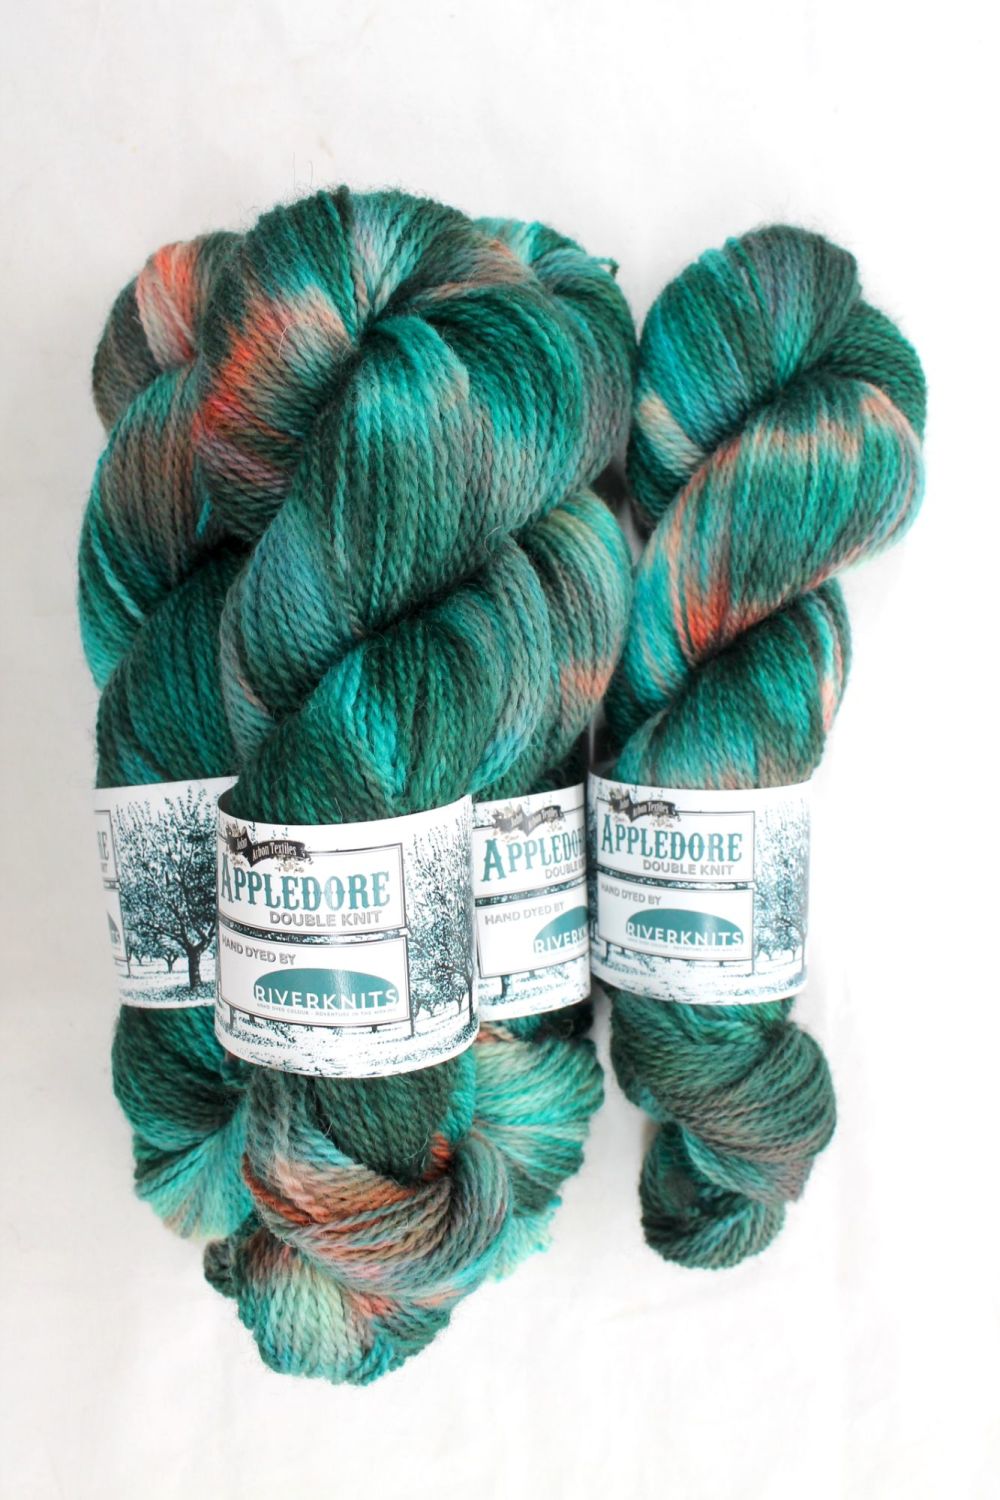 Excalibur ~ Appledore Limited Edition ~ Riverknits